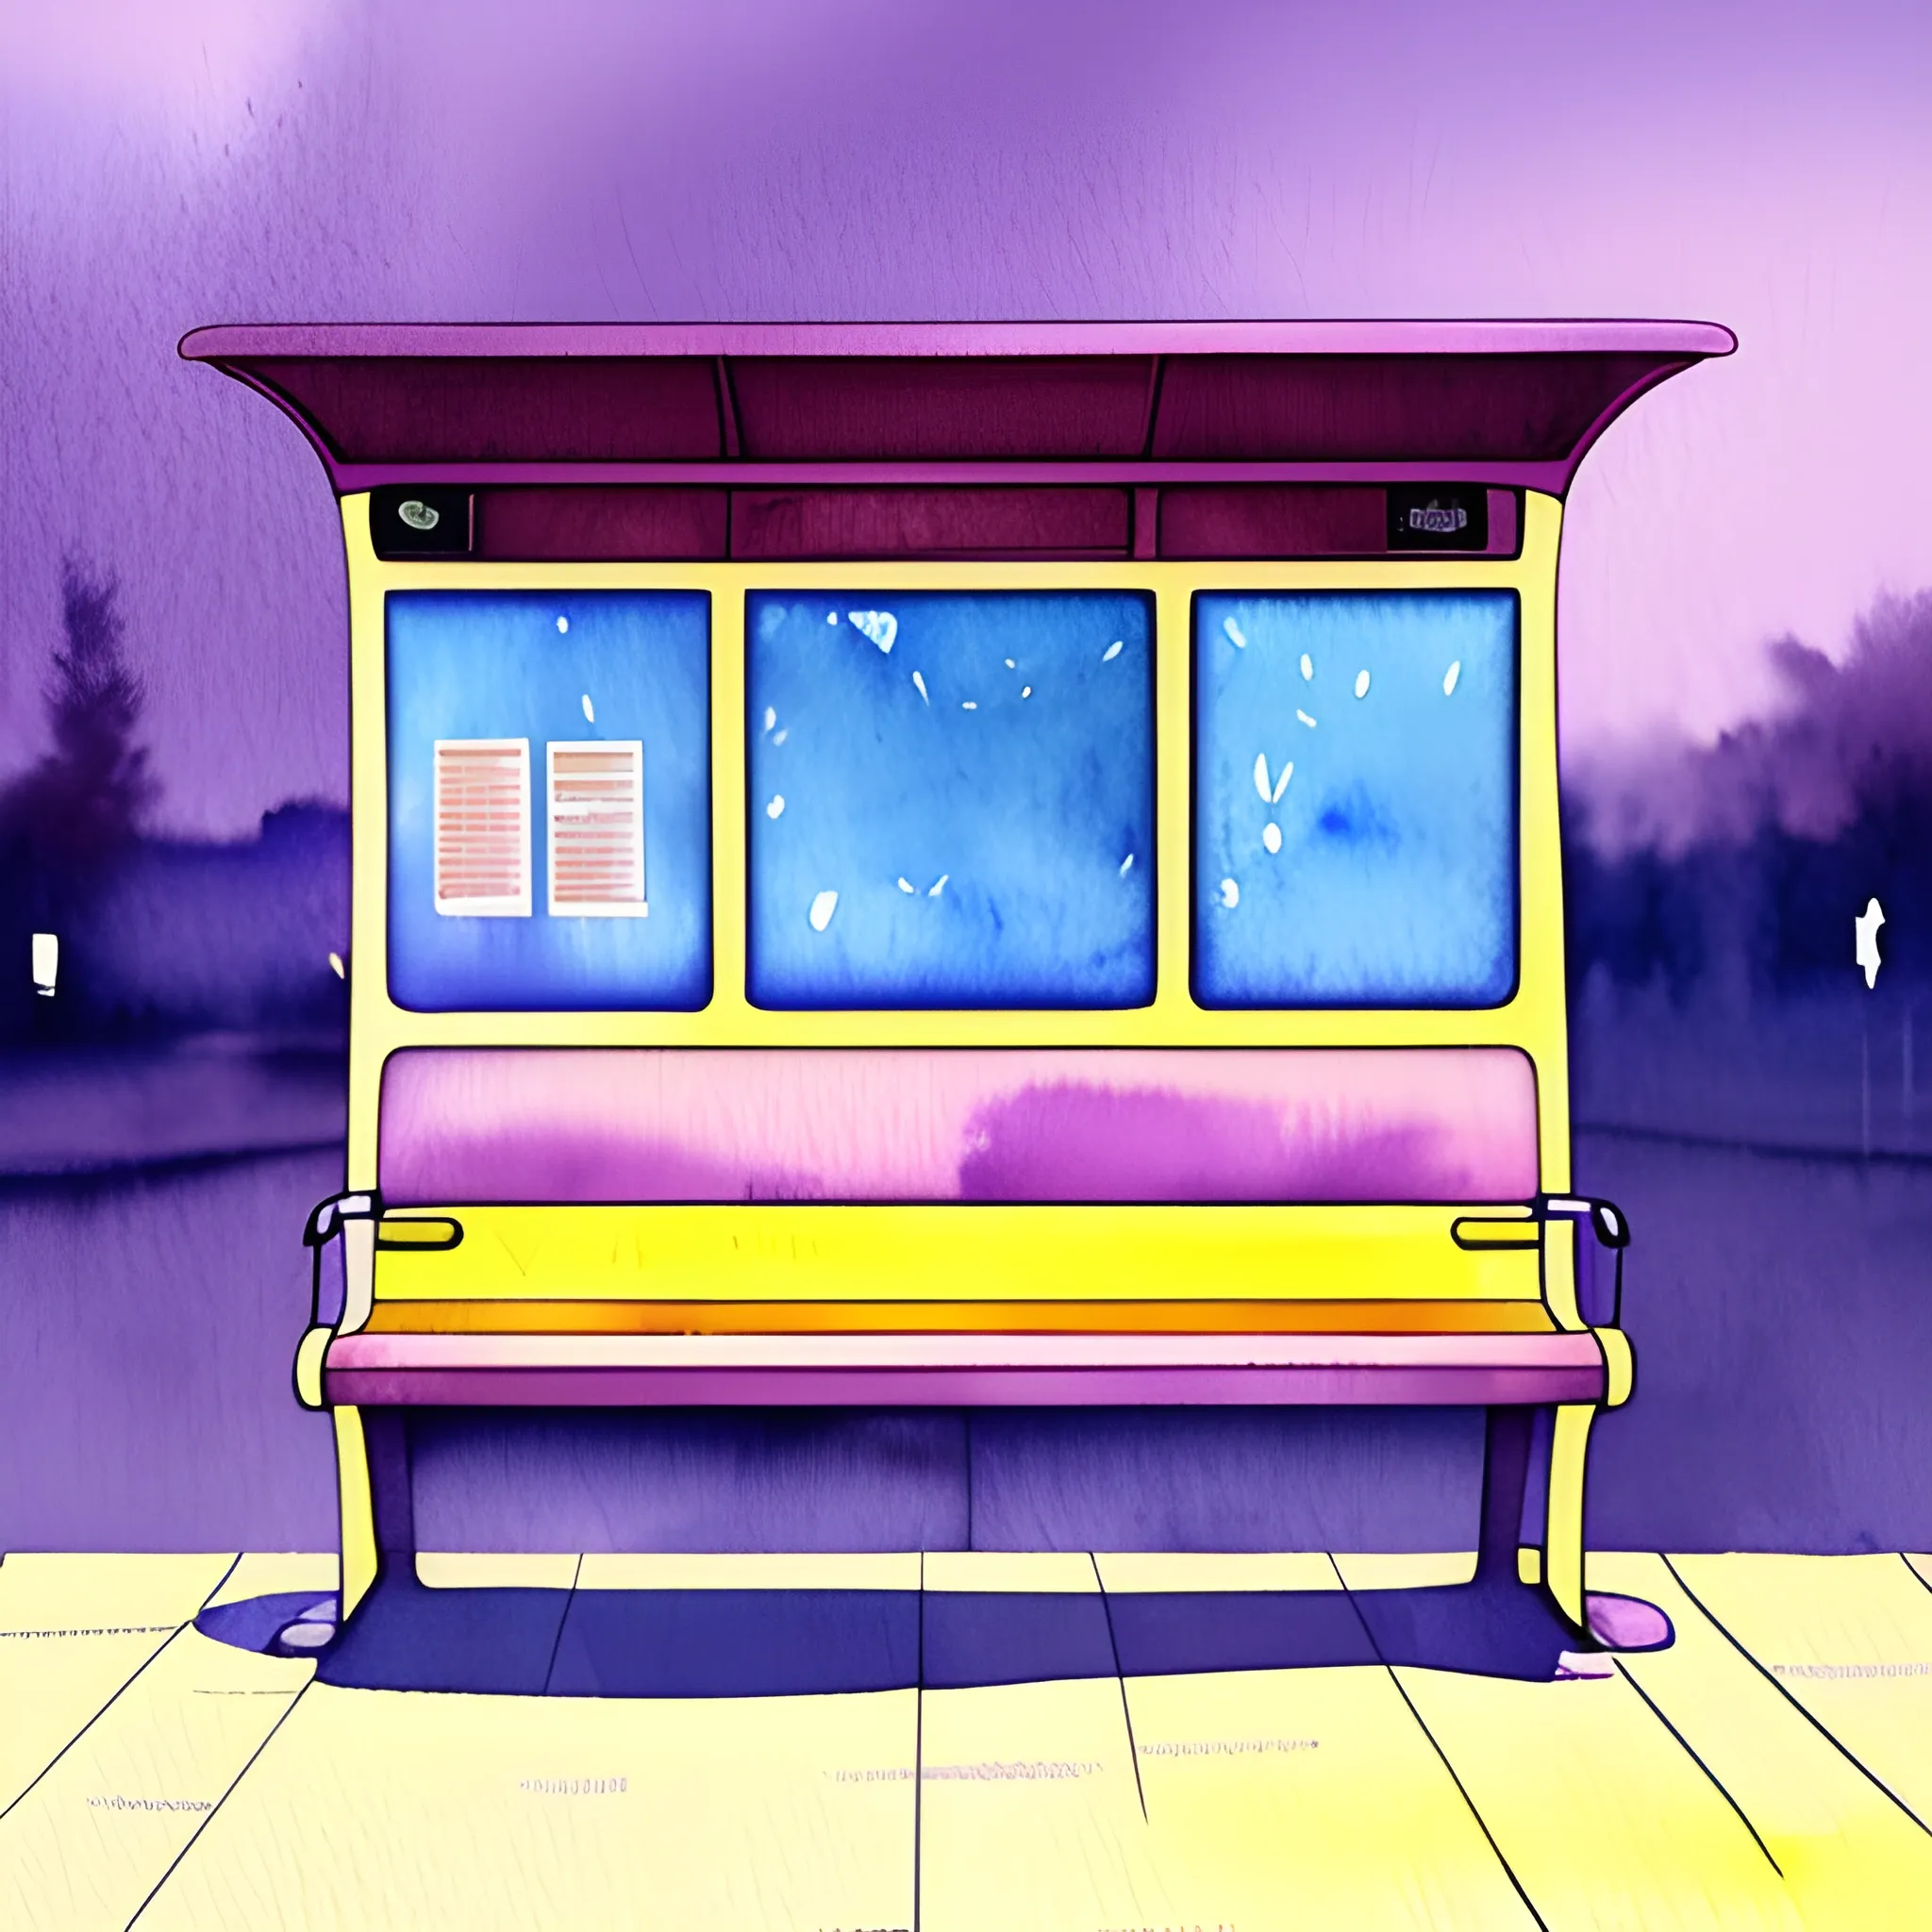 Create a watercolor illustration depicting the front view of a bus stop seat, not in profile or perspective, it must be a direct front view, with violet hues and a gentle rain, excluding individuals, and capturing the appearance of dusk